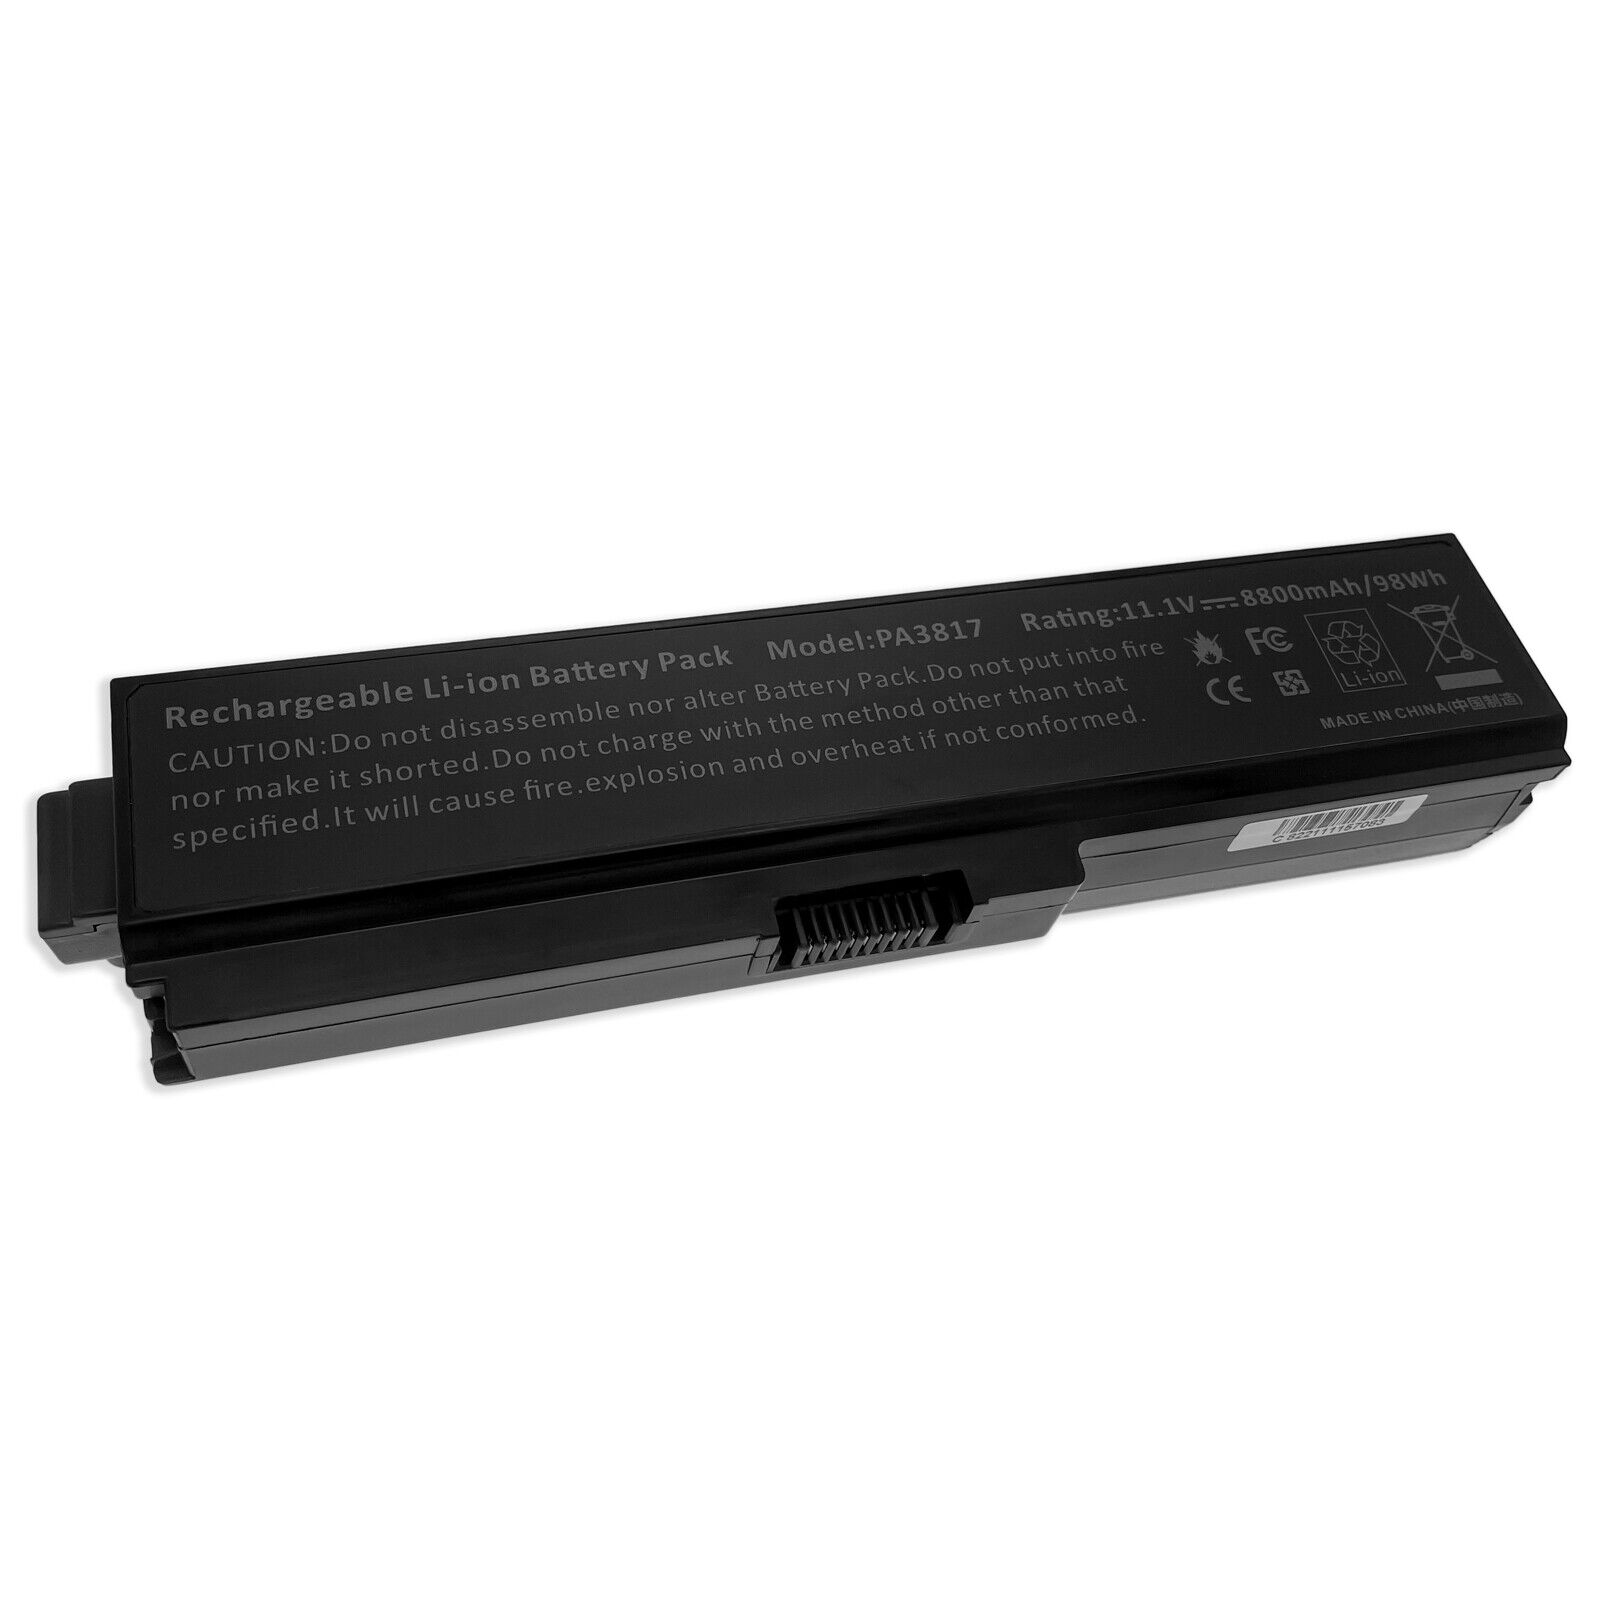 12 Cell 8800mAh Battery for Toshiba Satellite L755D-S5204 L755-S9520D L755-S5246